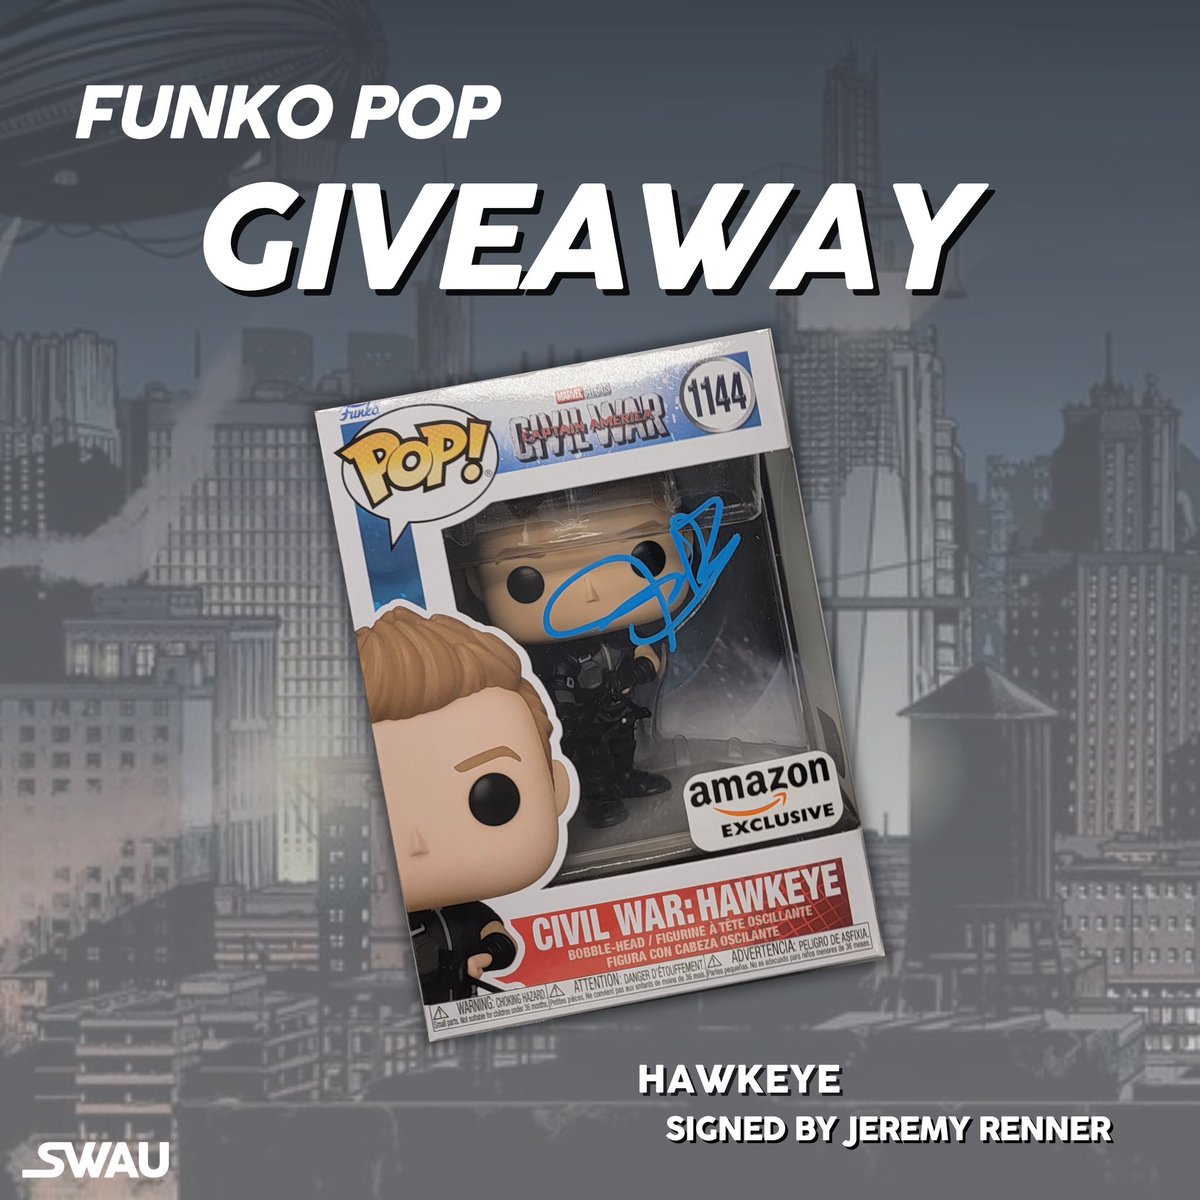 We’re excited to announce our next giveaway! All Marvel fans are going to want to step back up to the plate; enter for a chance to win this Hawkeye Funko Pop signed by Jeremy Renner! Here are the rules. To enter: • Follow @swau_offical • Like this post • Retweet for an…